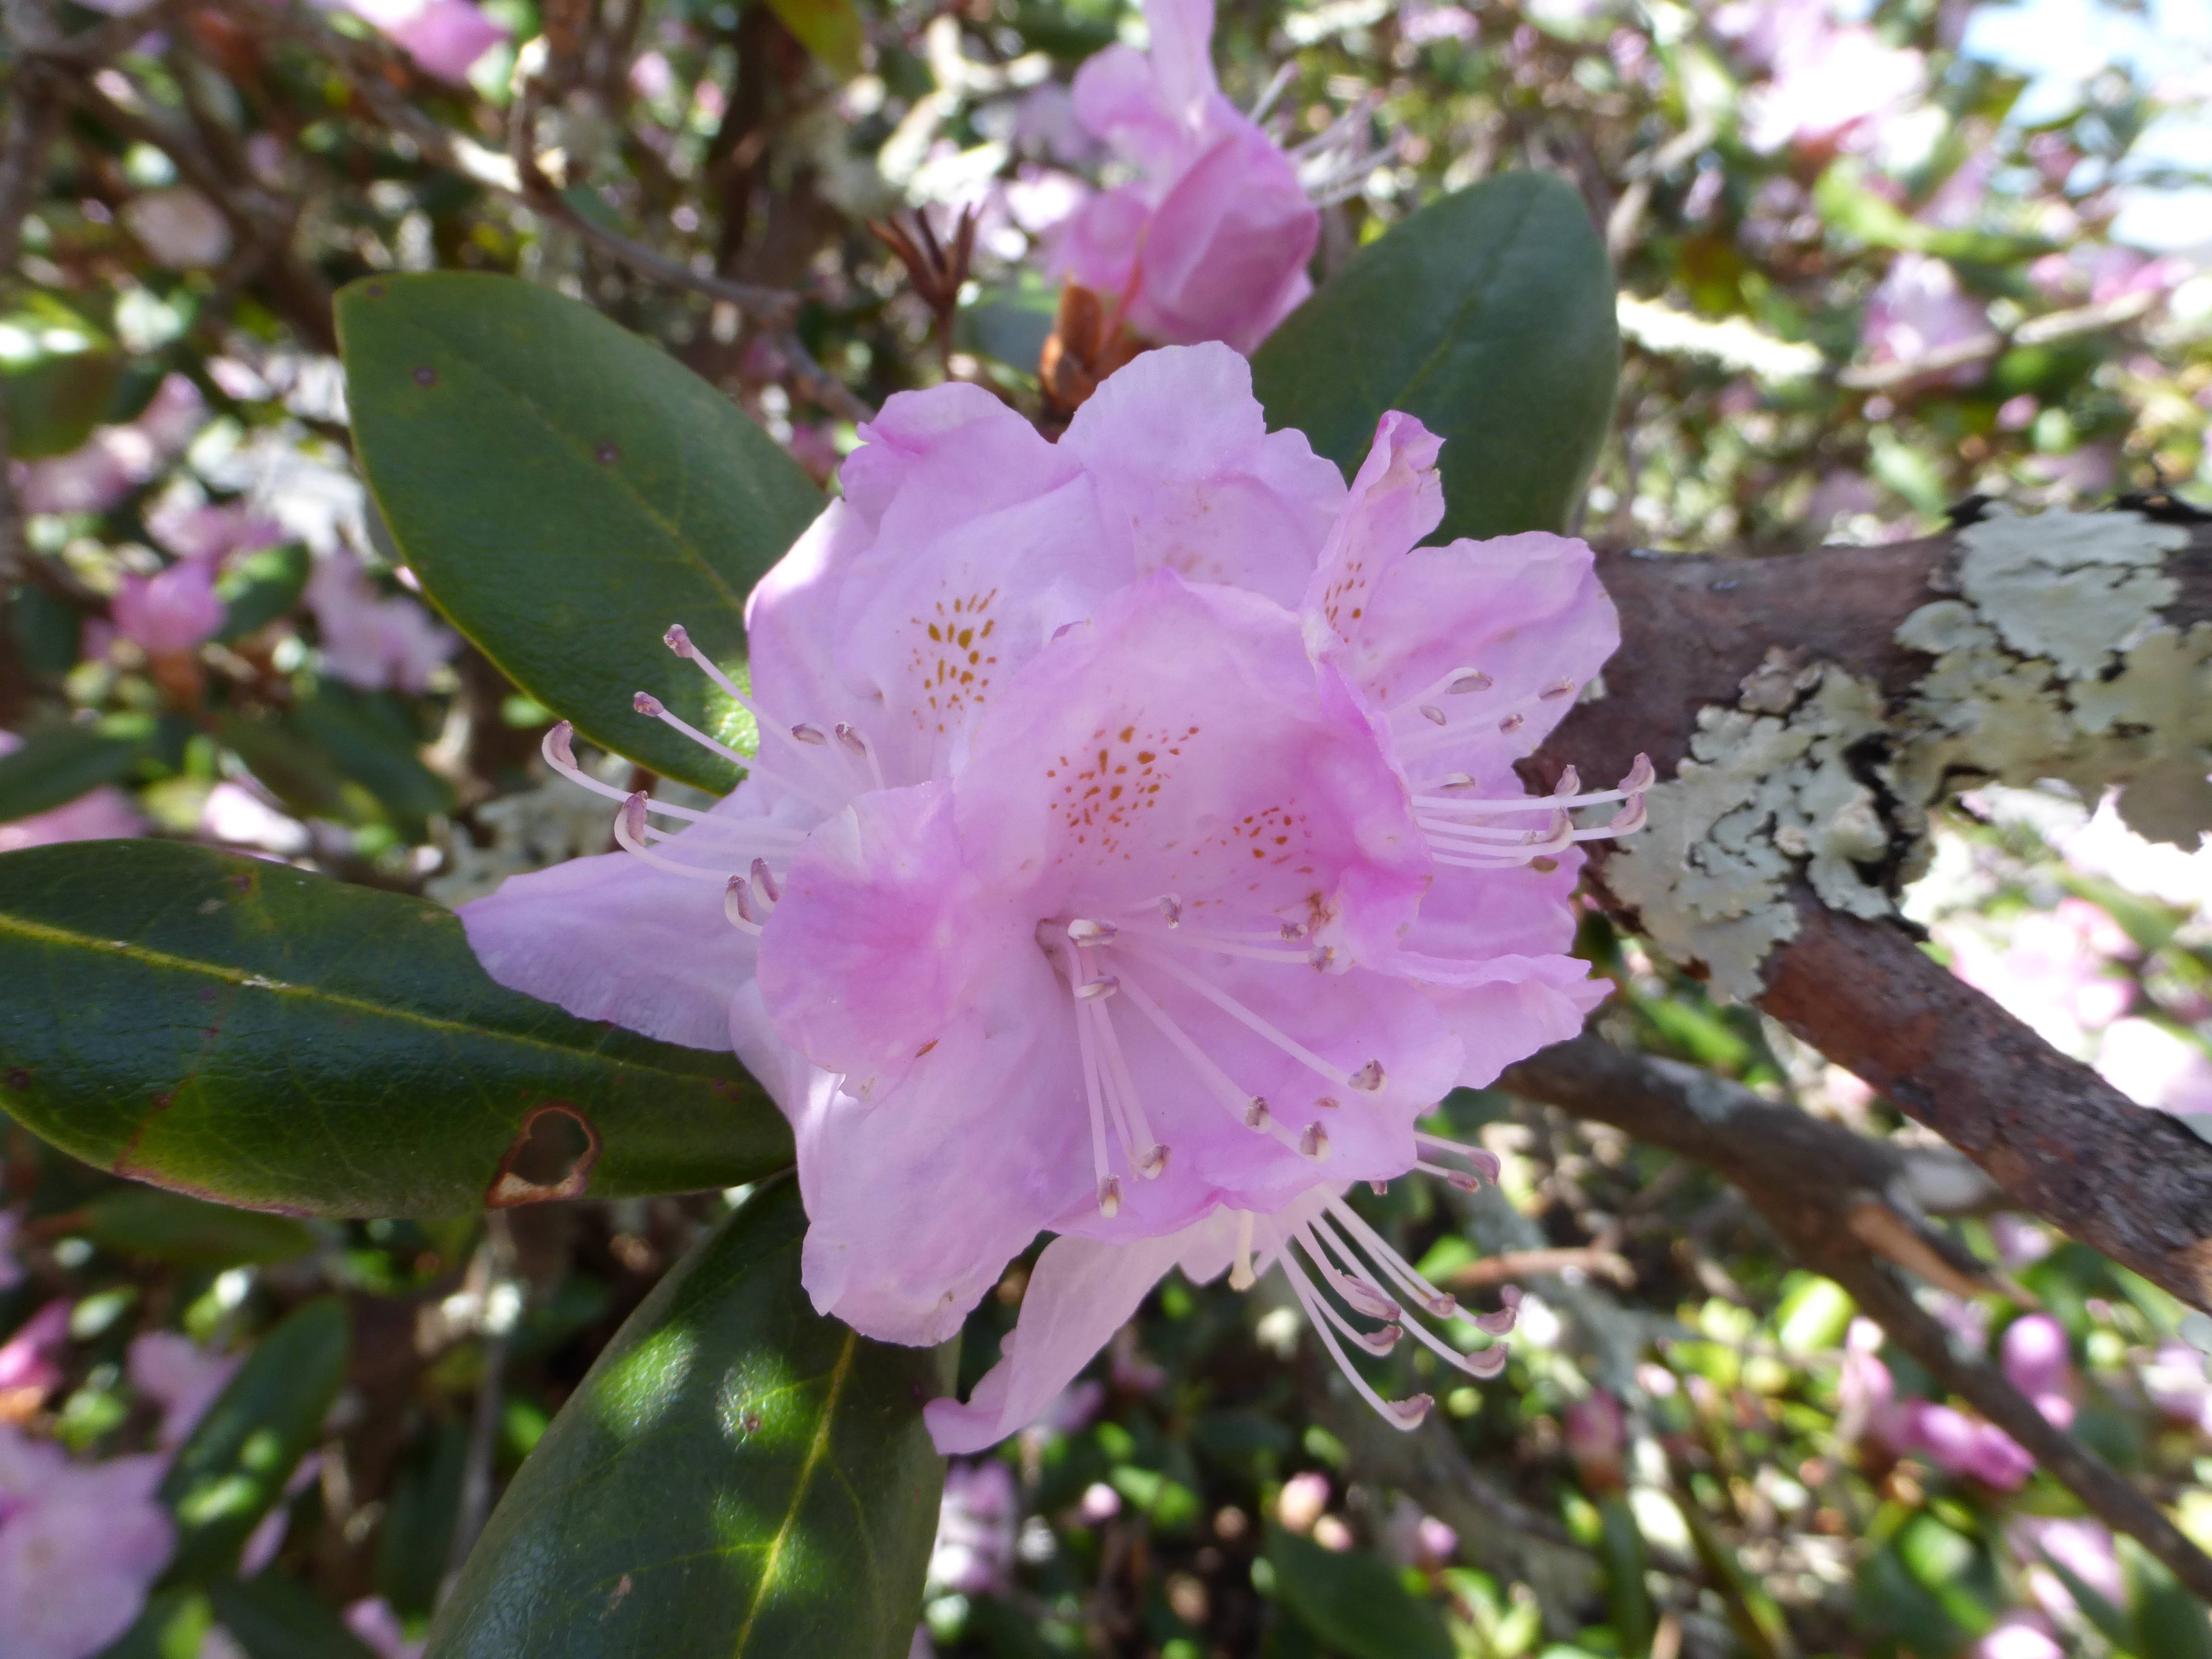 The Scientific Name is Rhododendron carolinianum. You will likely hear them called Carolina Rhododendron, Punctatum. This picture shows the Flowers are mostly pink but can be light pink and even white. of Rhododendron carolinianum